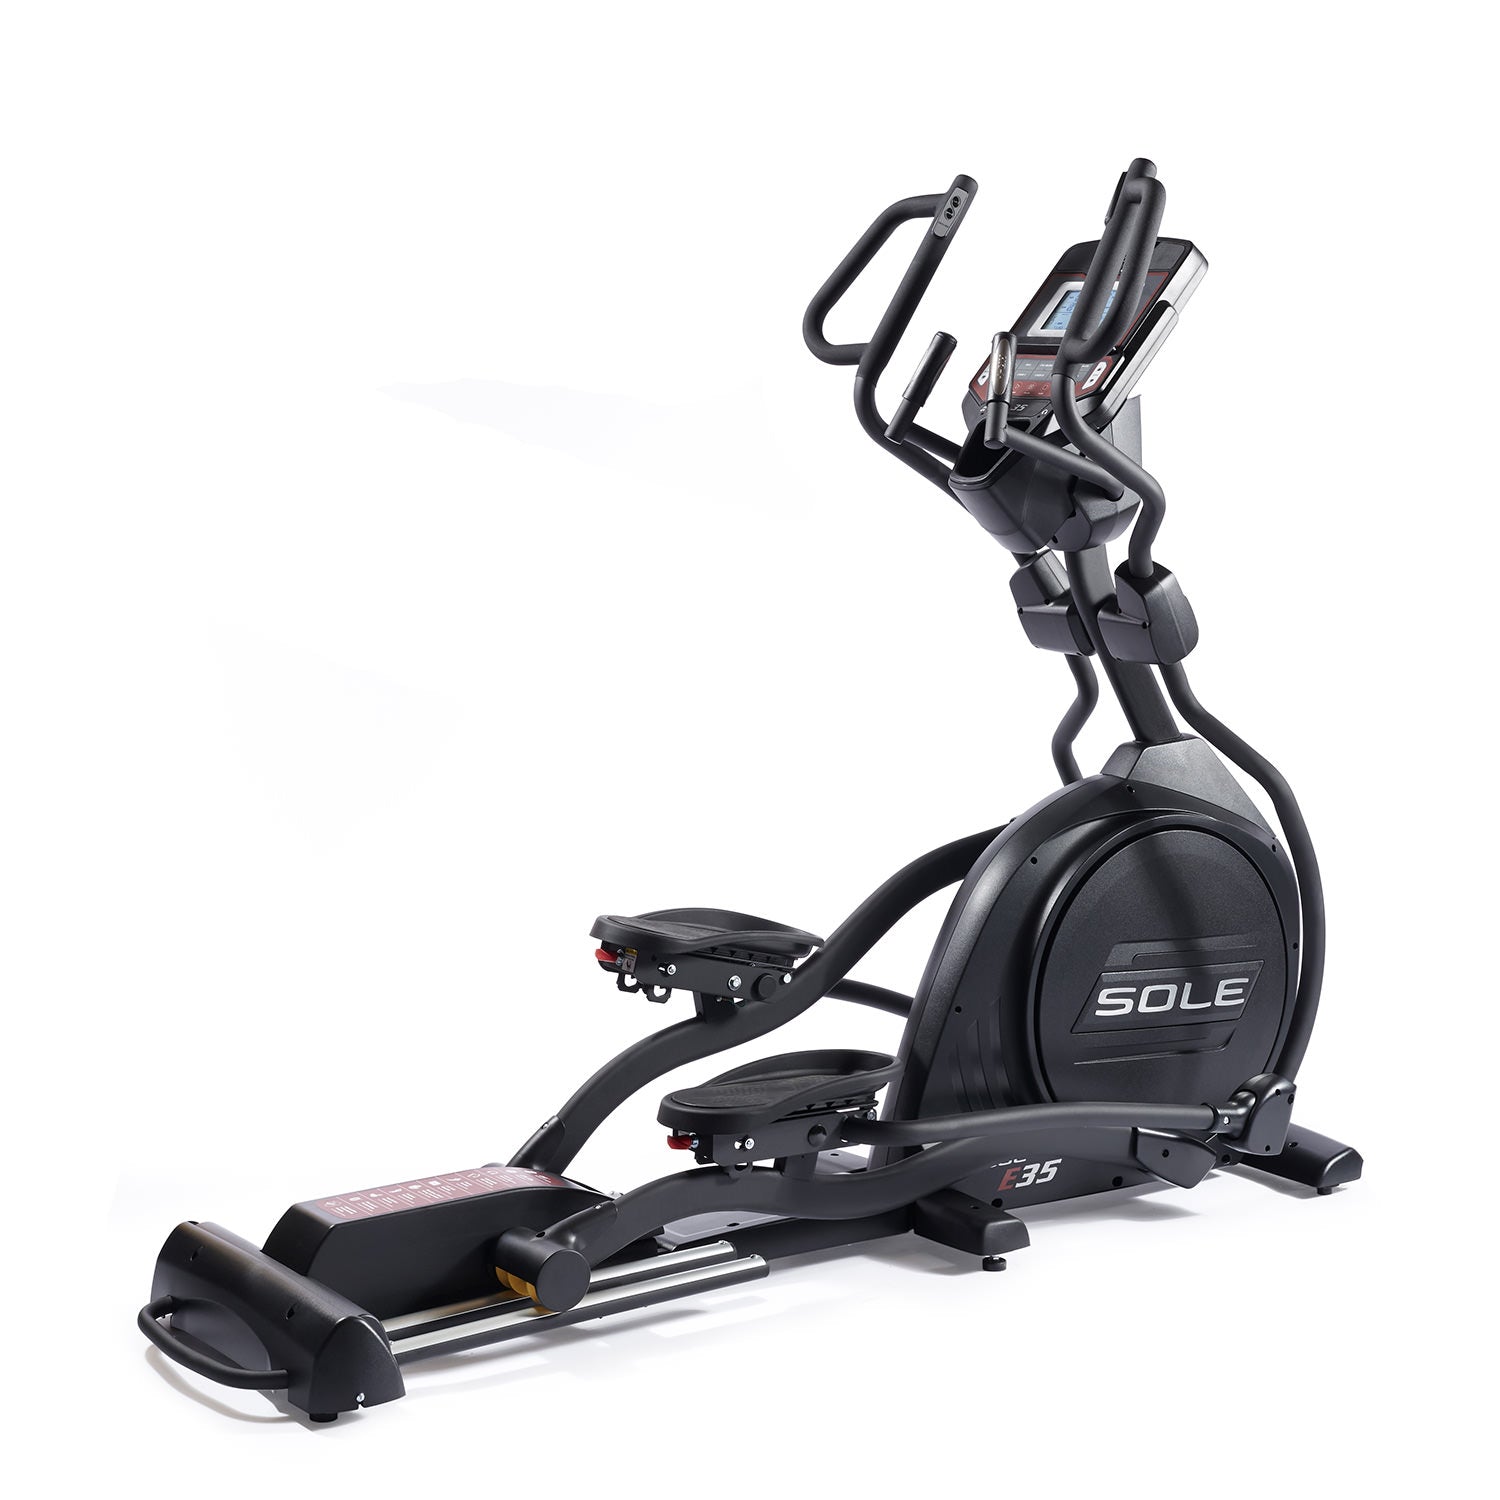 Image of Sole E35 Elliptical Cross Trainer - In Store For You To Try